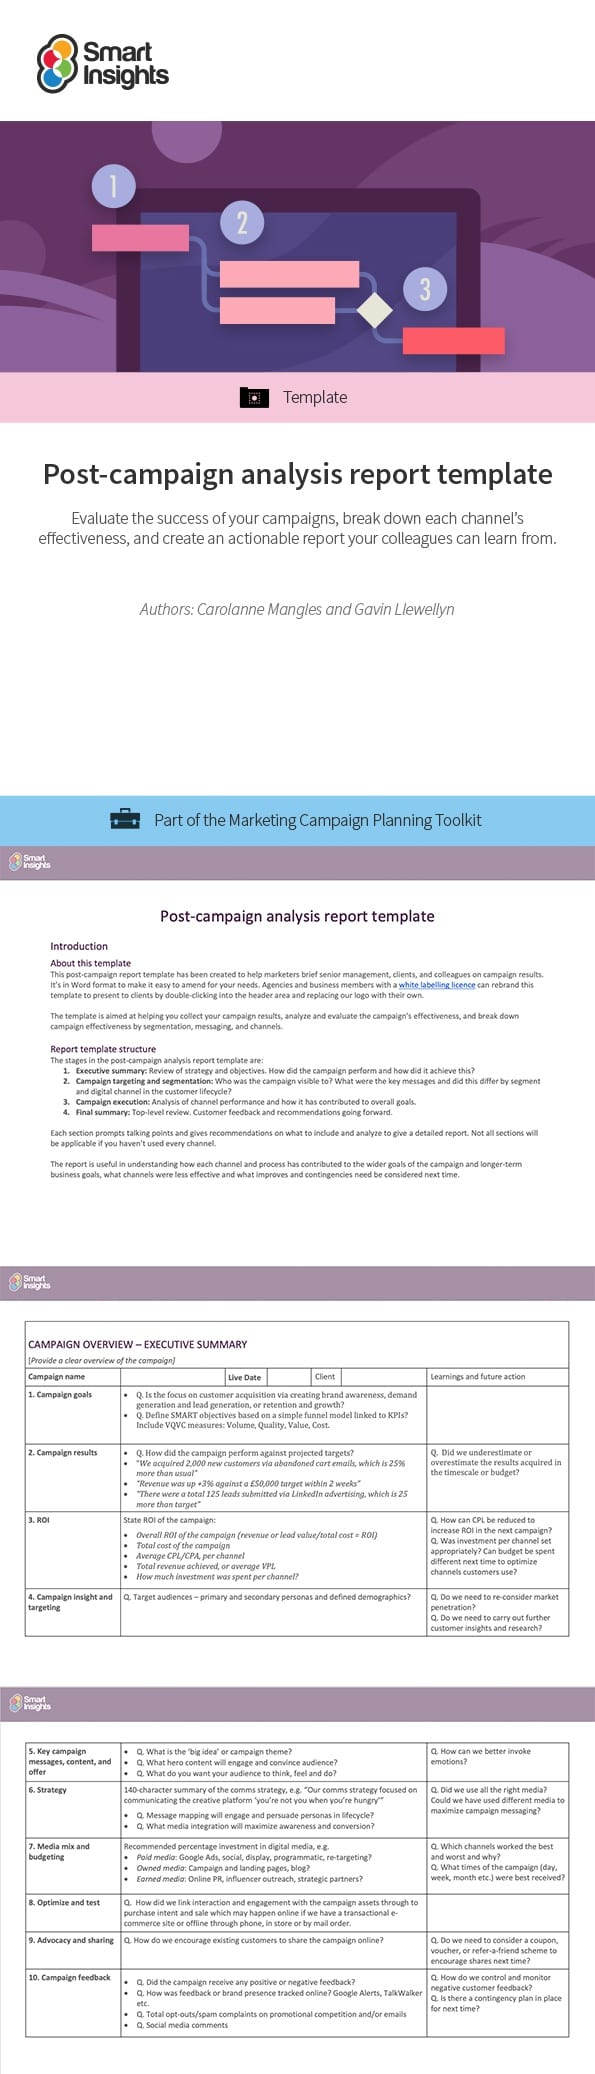 Post-campaign analysis report template  Smart Insights For Marketing Campaign Analysis Report Template Inside Marketing Campaign Analysis Report Template